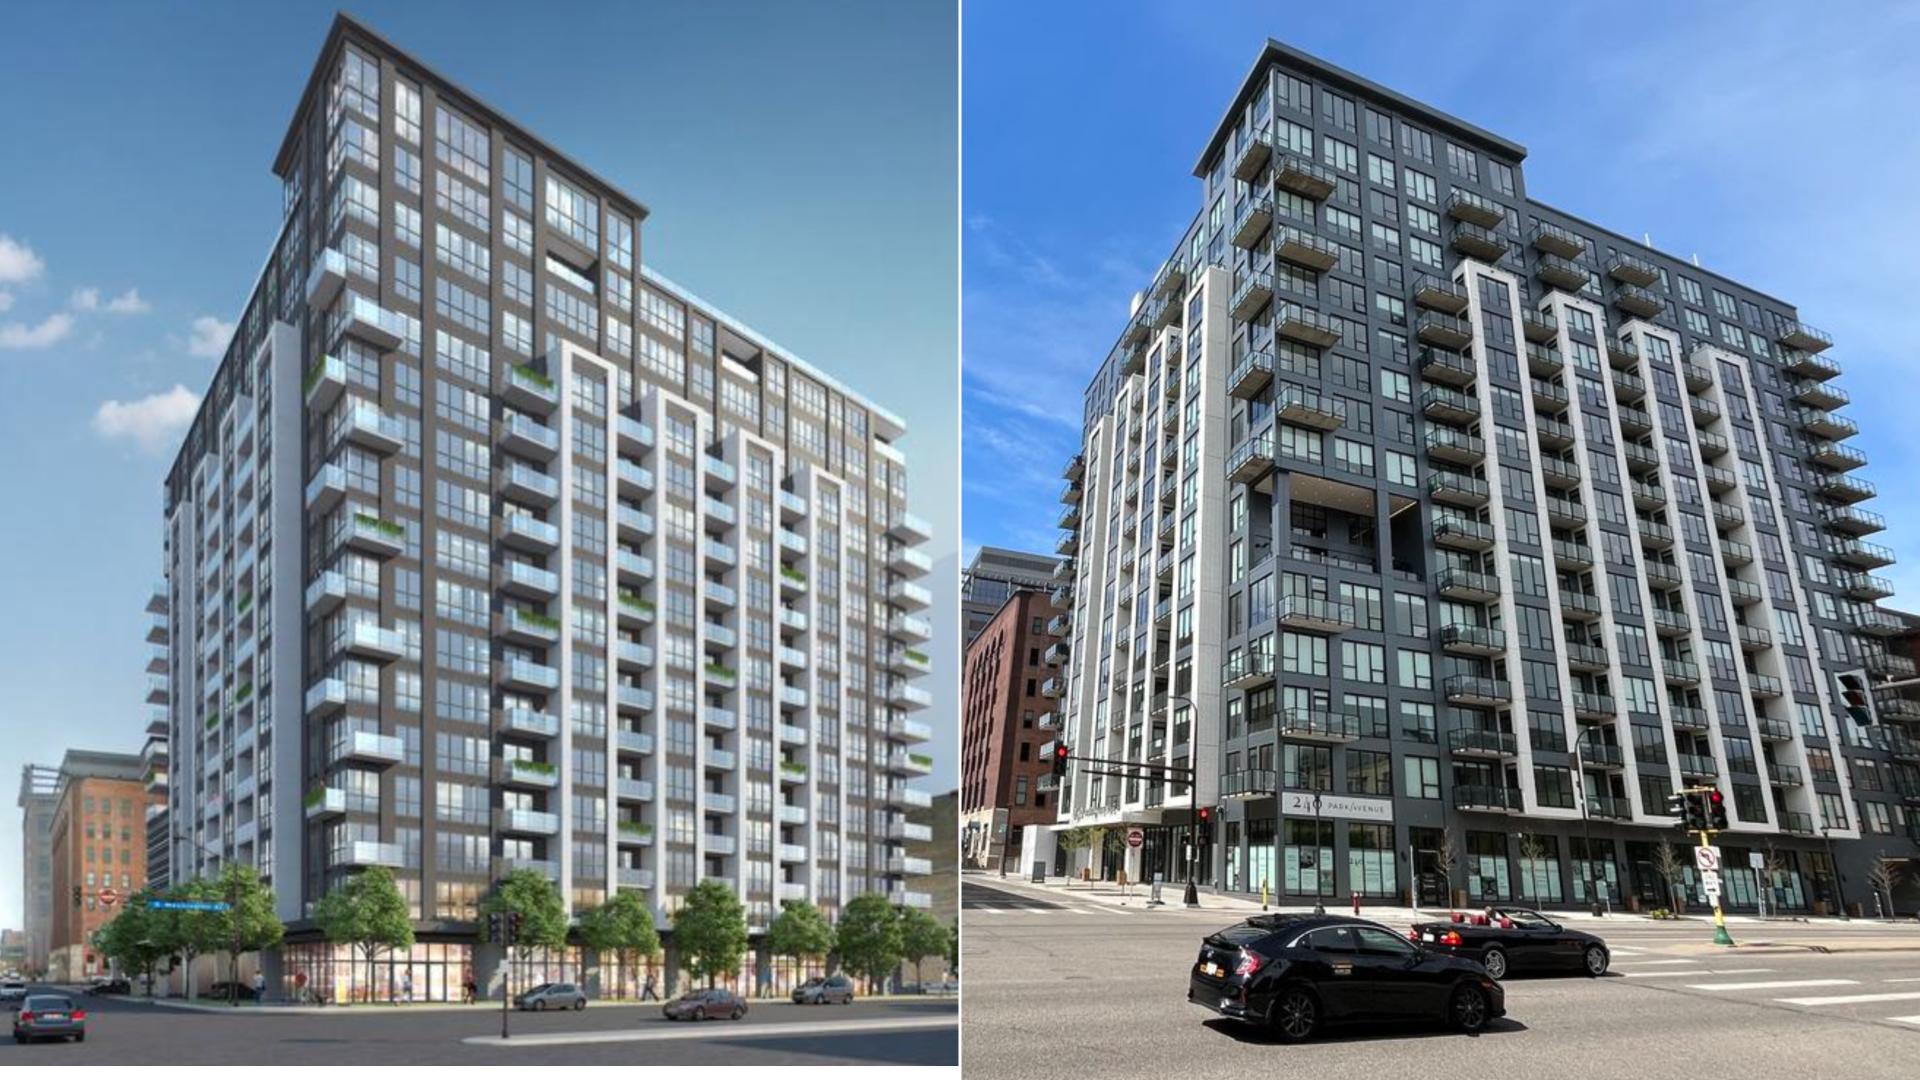 An image of a rendering of a downtown Minneapolis apartment tower, next to a photo of the actual building after construction completed.